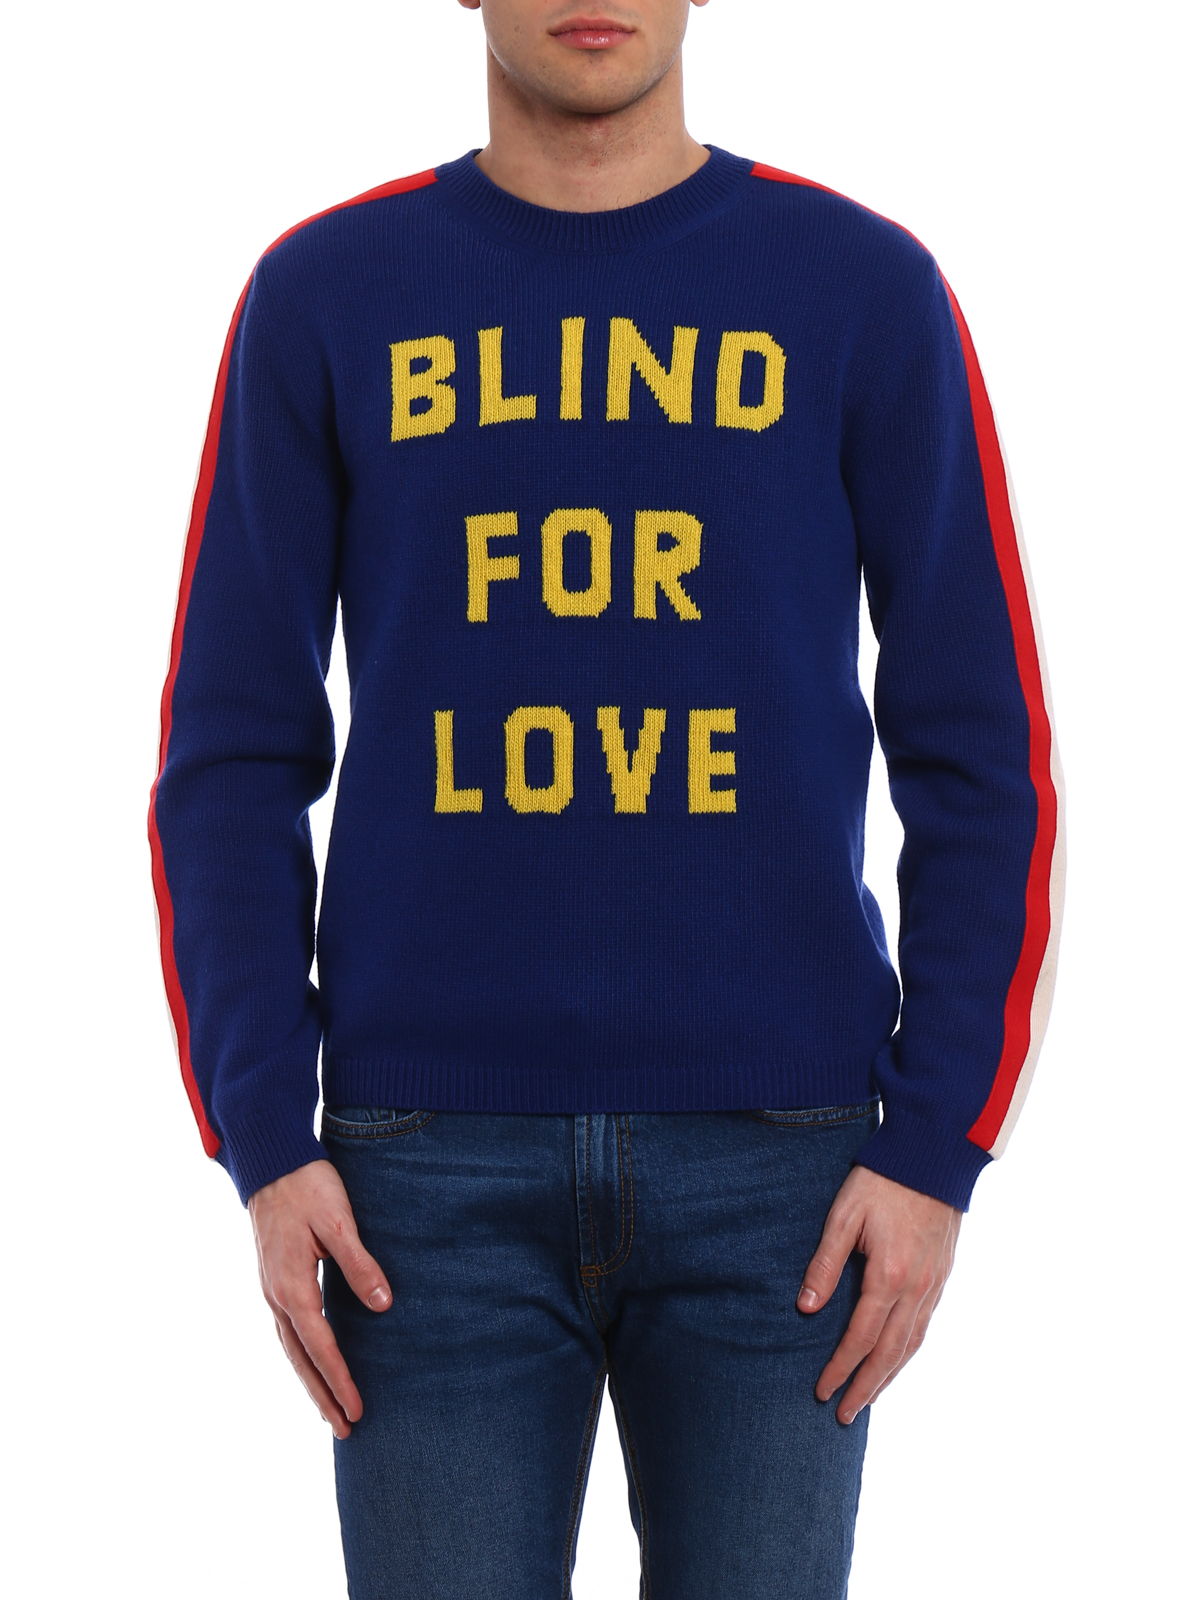 blind for love gucci t shirt